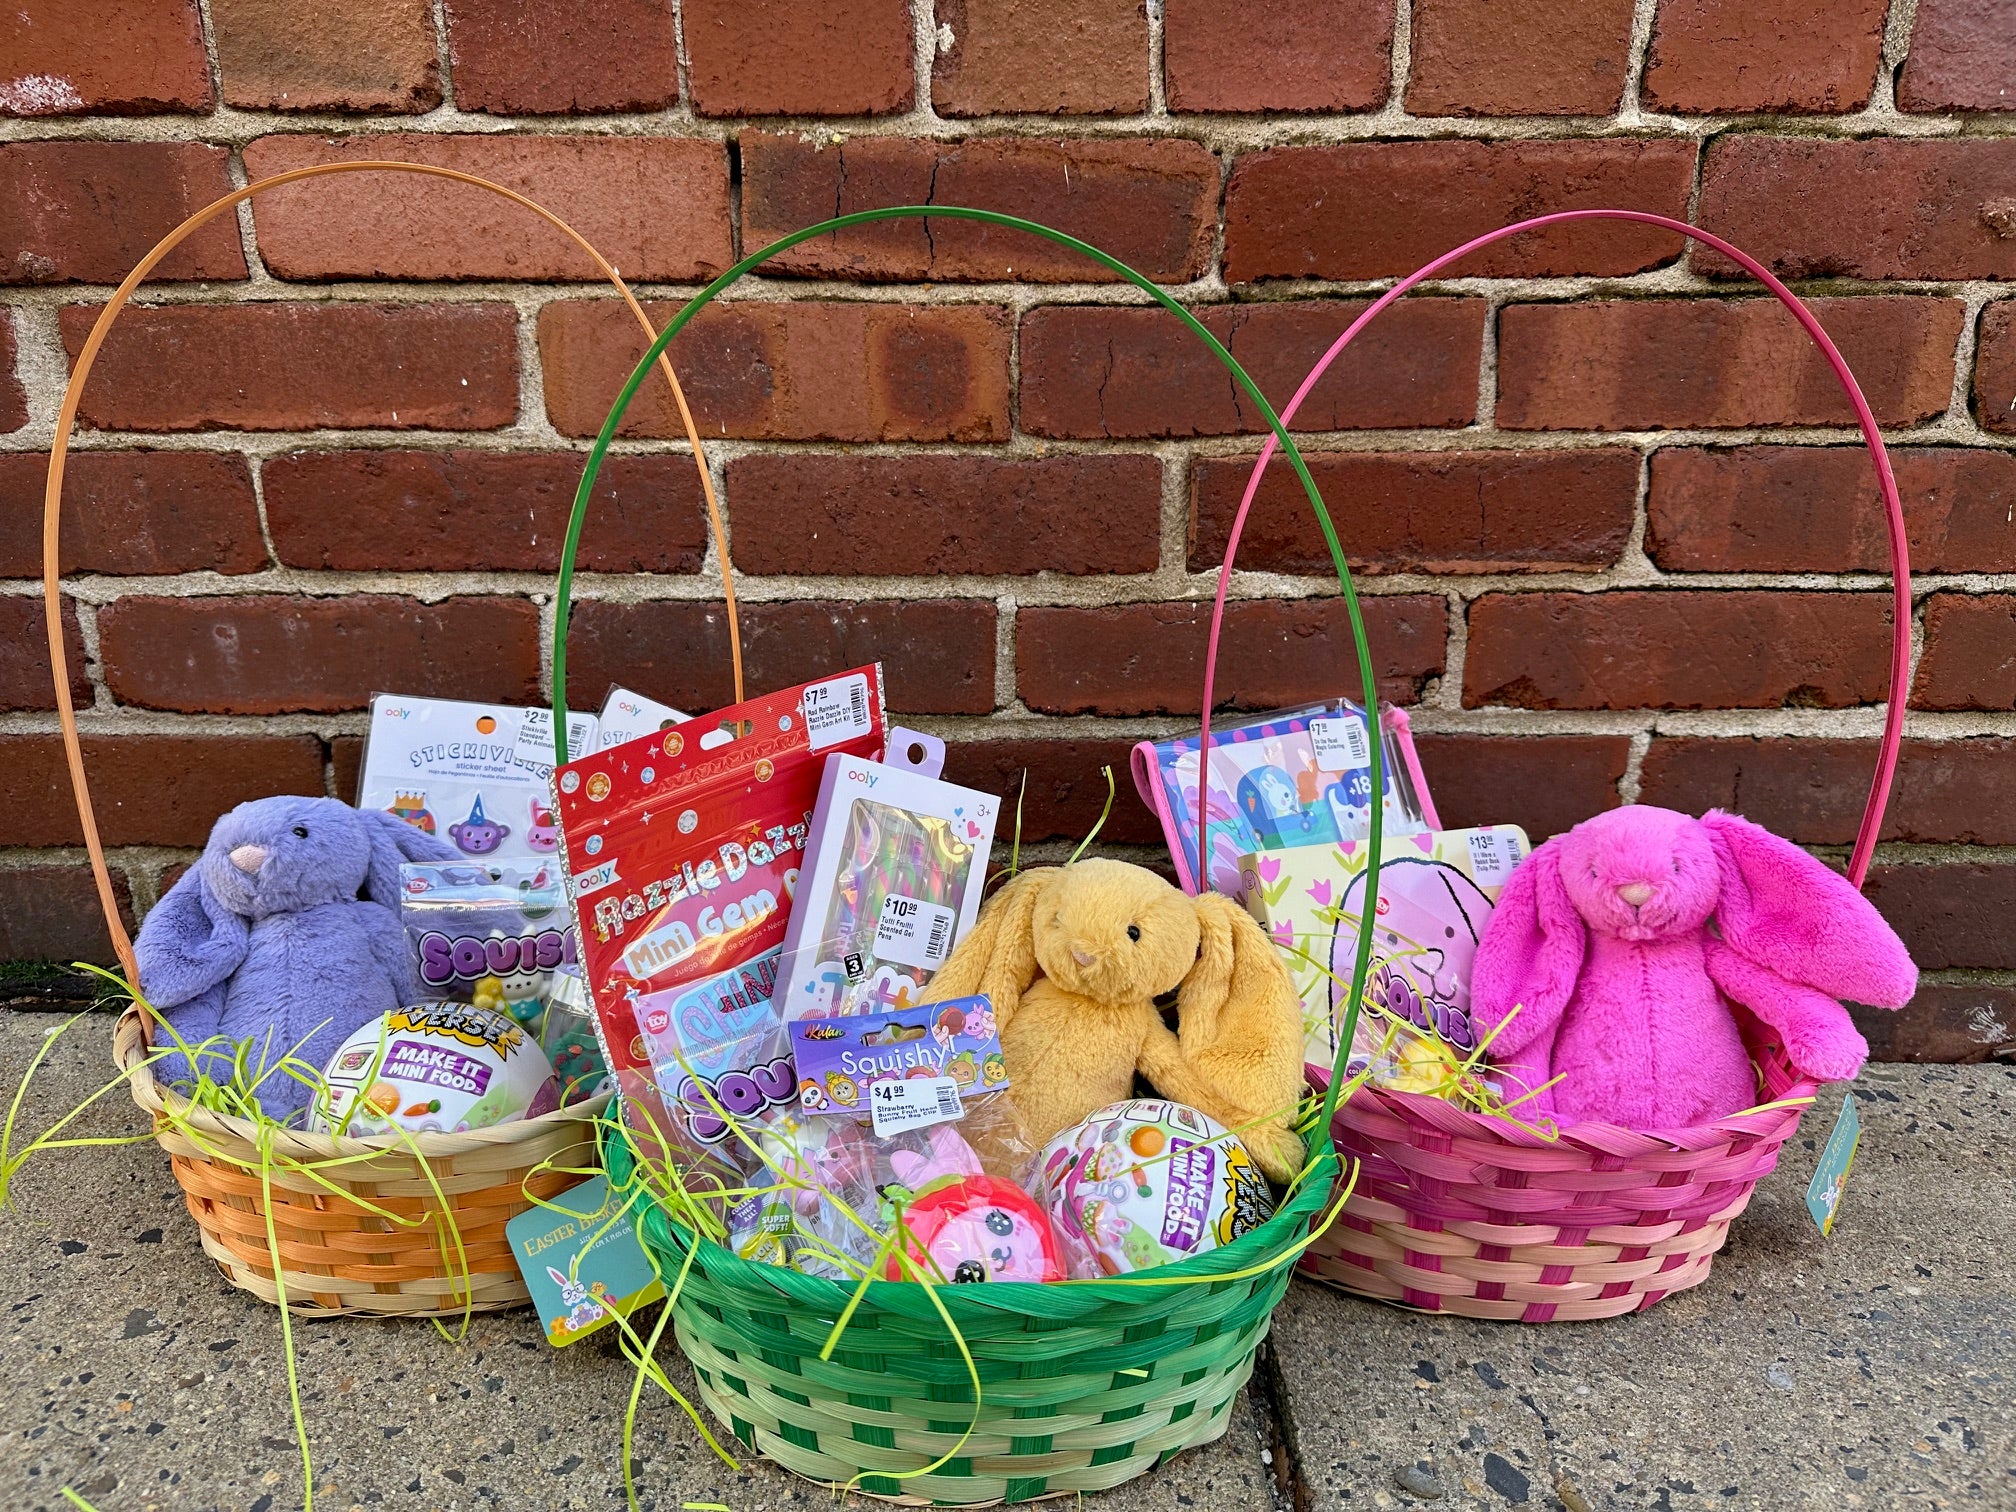 Easter Basket with Grass